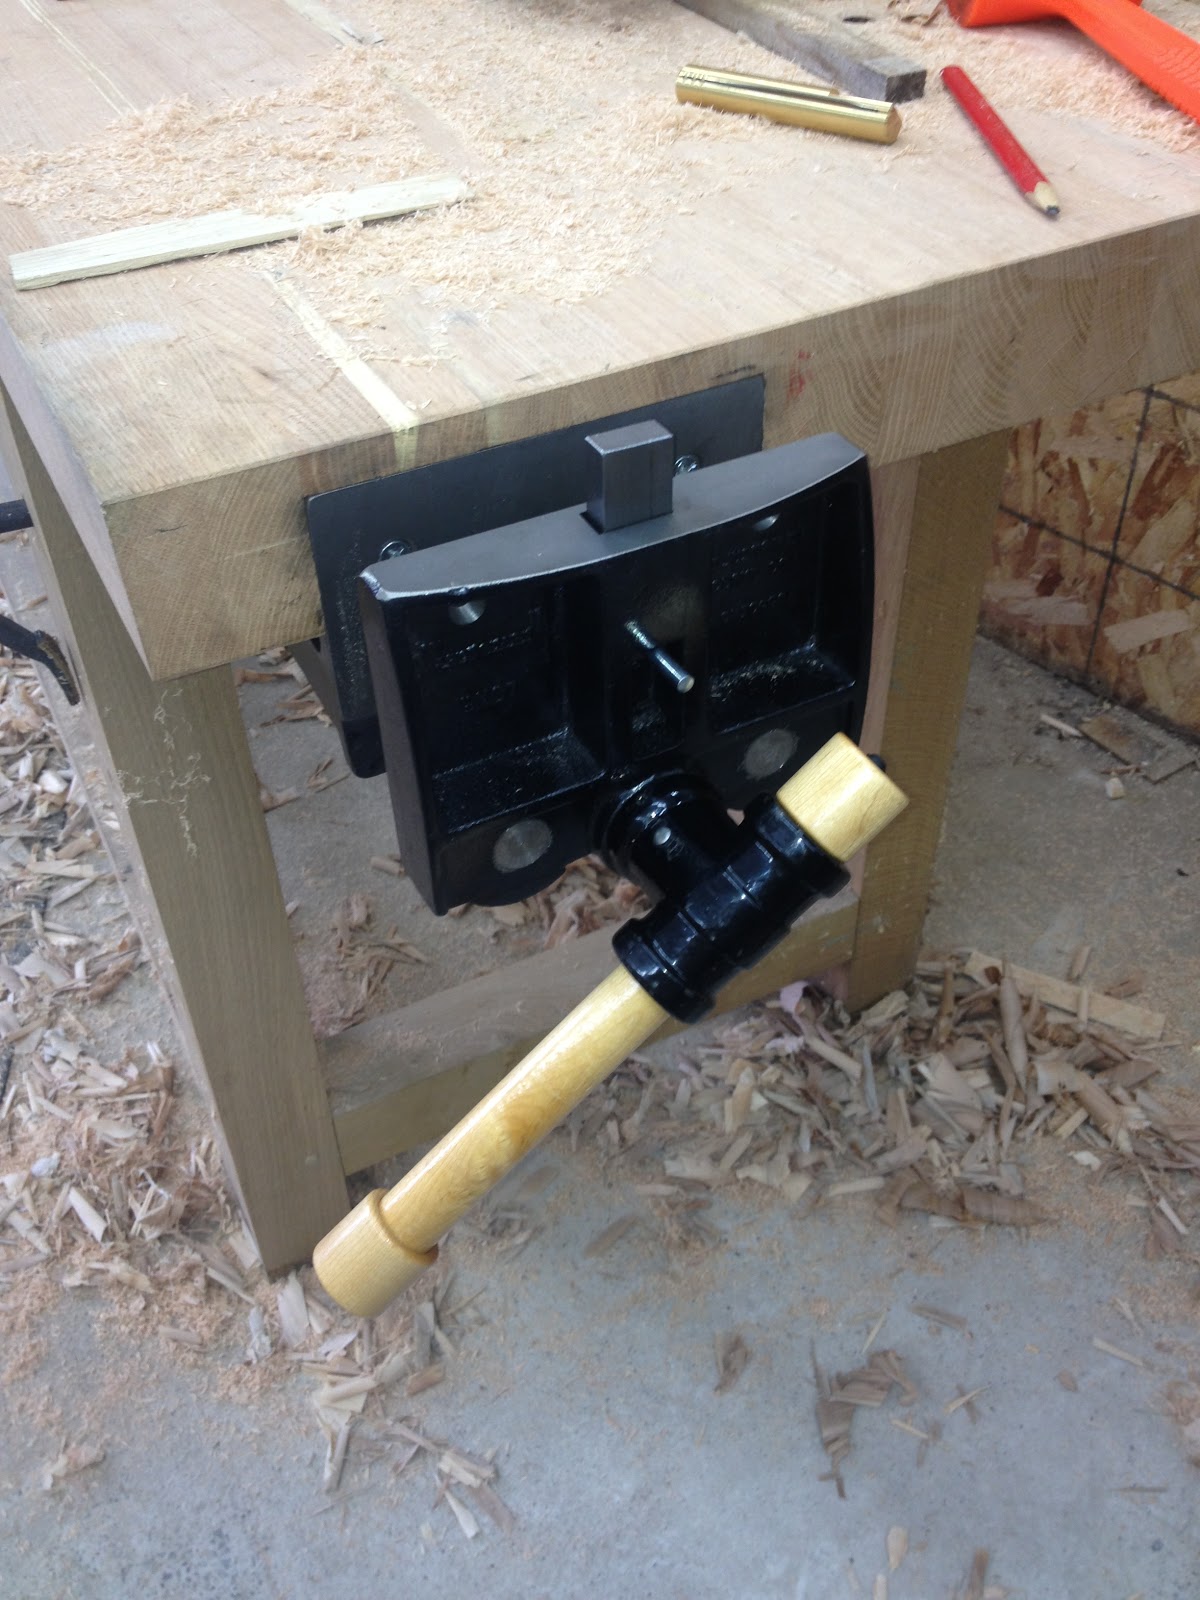 big dave's woodworking: jorgensen vise, where have you